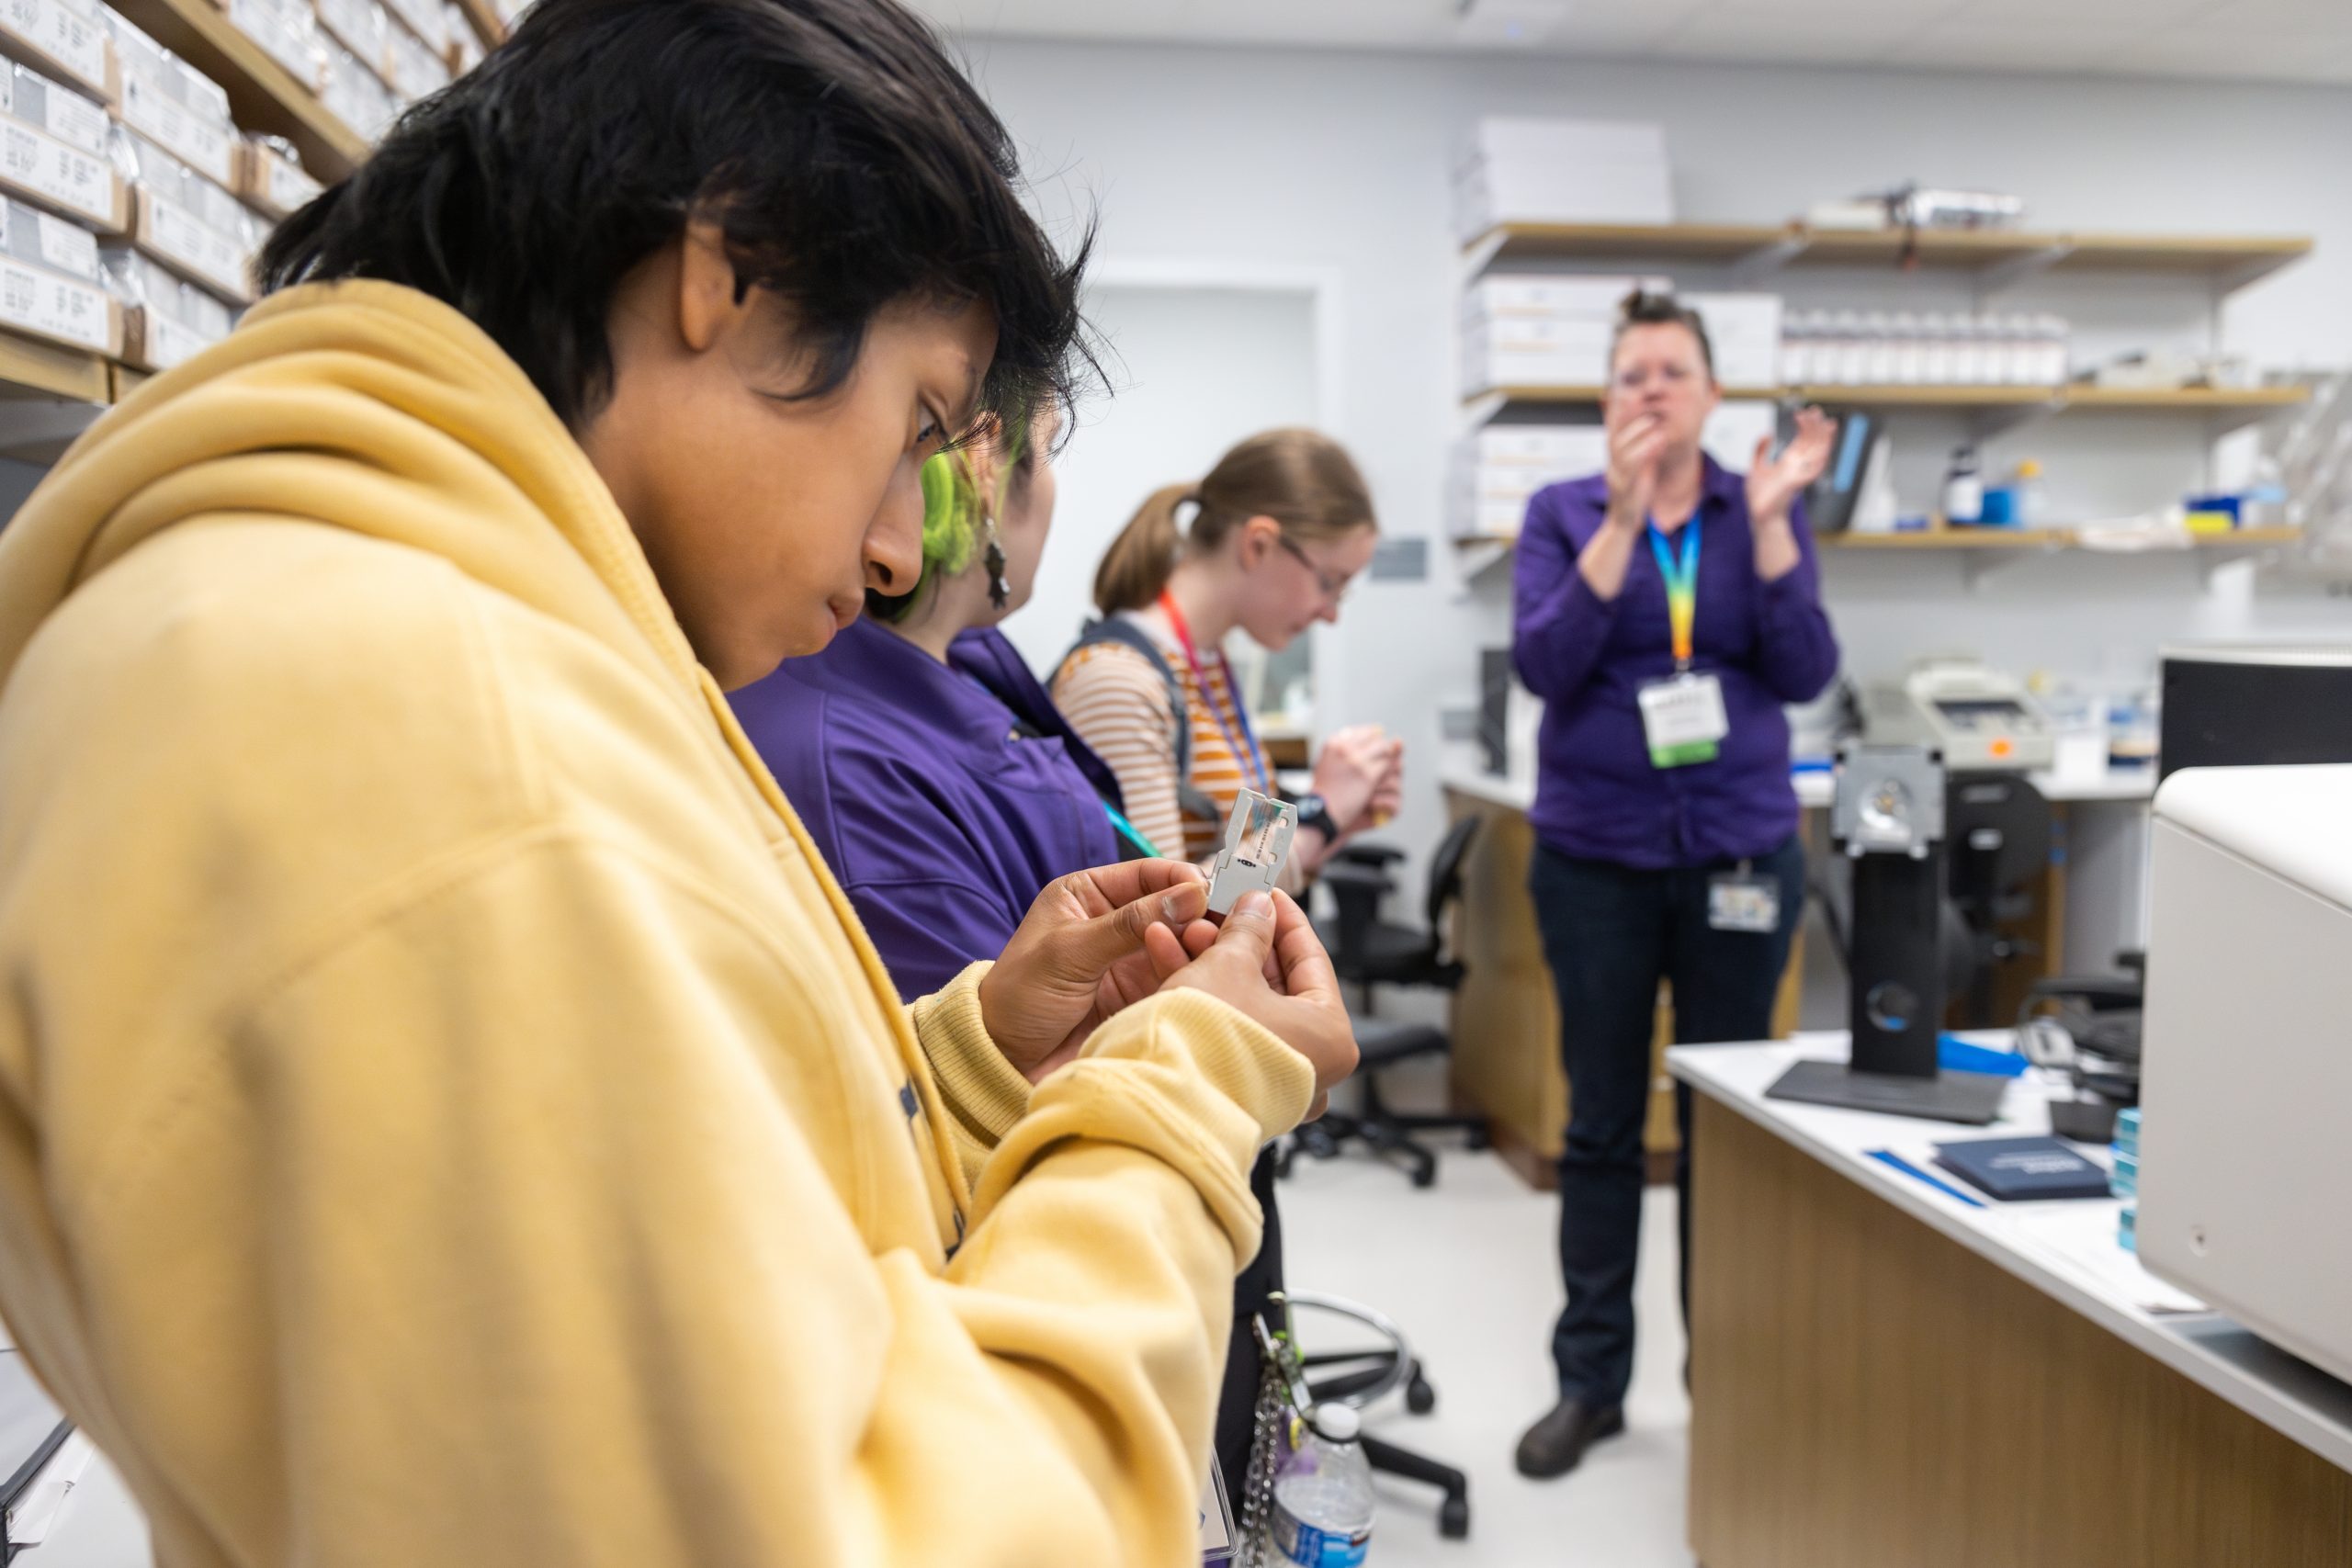 Conard High School student Jojo Painter holds a part for one of the imaging systems in MARS’ sequencing lab as Kendra Maas walked their group through the MARS lab